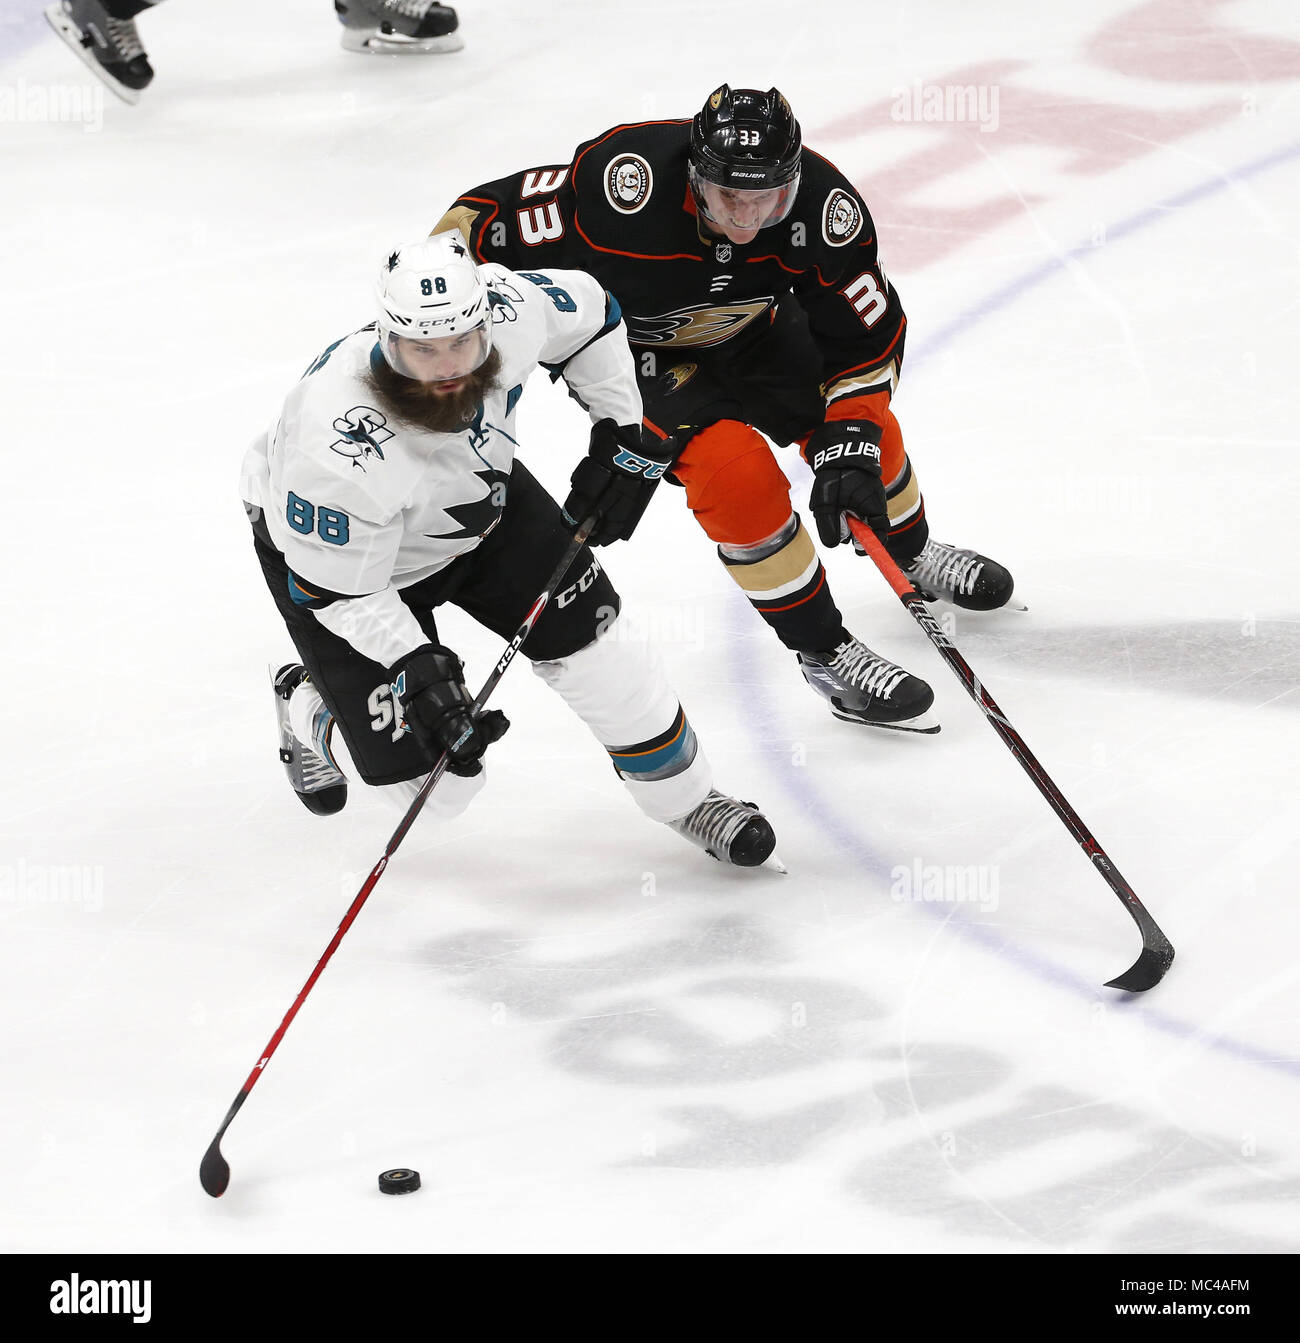 FILE - San Jose Sharks' Brent Burns plays against the Nashville Predators  in the second period of an NHL hockey game, Tuesday, April 12, 2022, in  Nashville, Tenn. Defenseman Burns has been